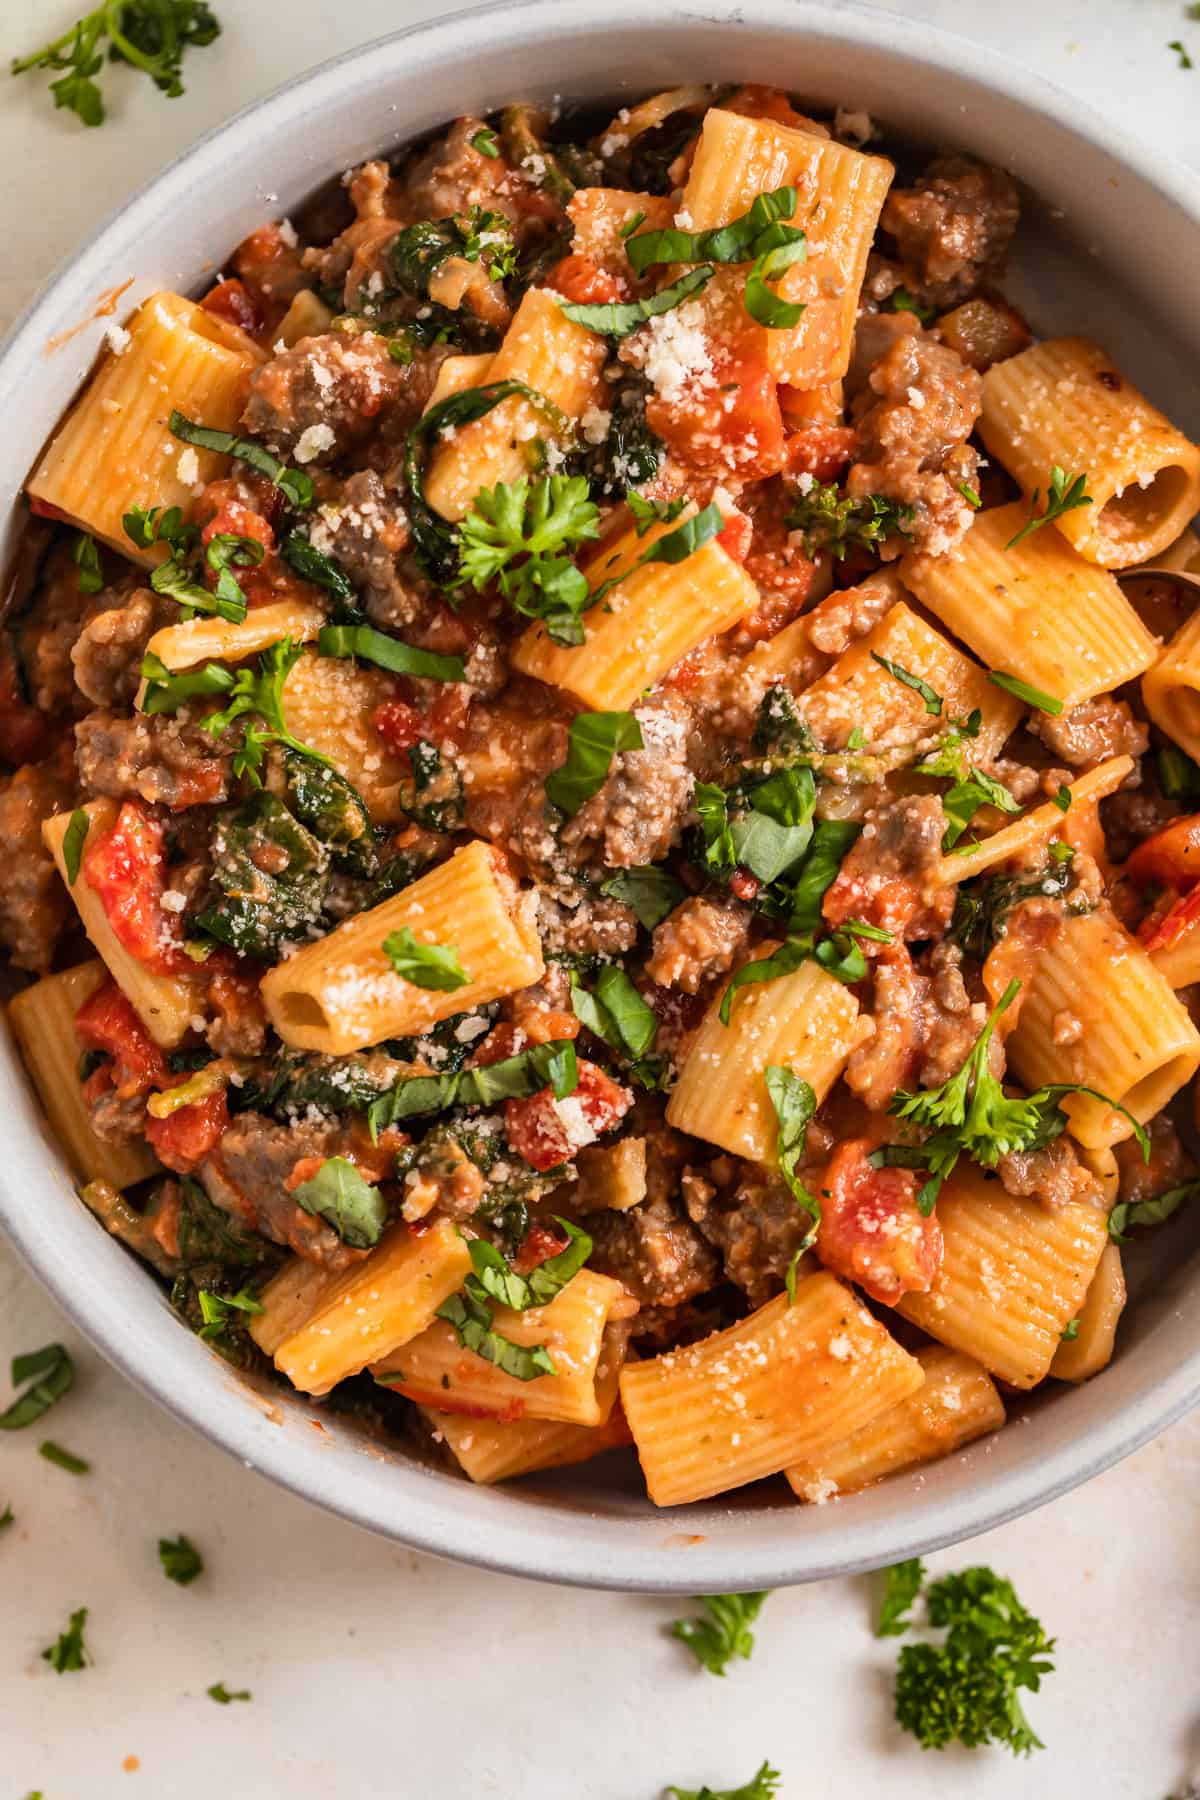 Bowl of spicy sausage pasta with chopped parsley and basil on top.